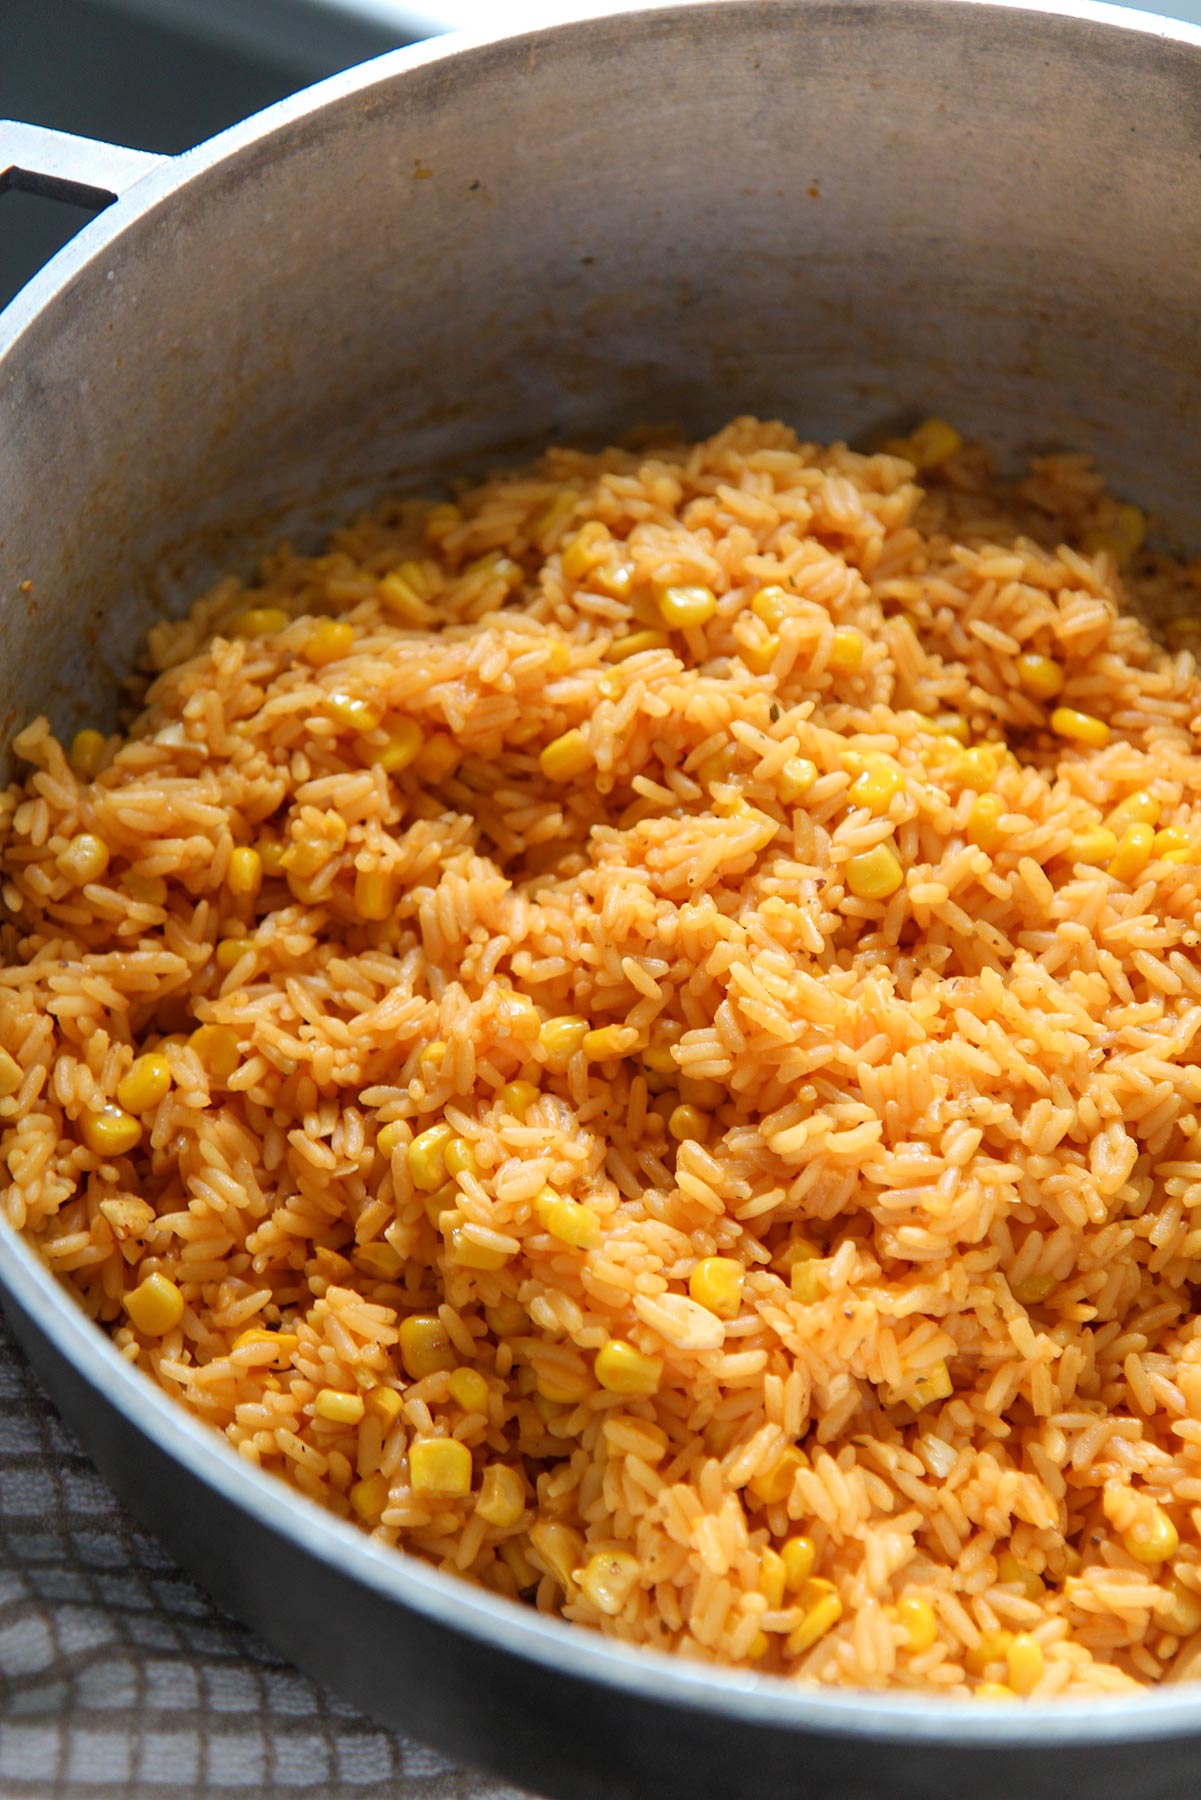 https://www.cookedbyjulie.com/wp-content/uploads/2020/06/yellow-rice-one.jpg